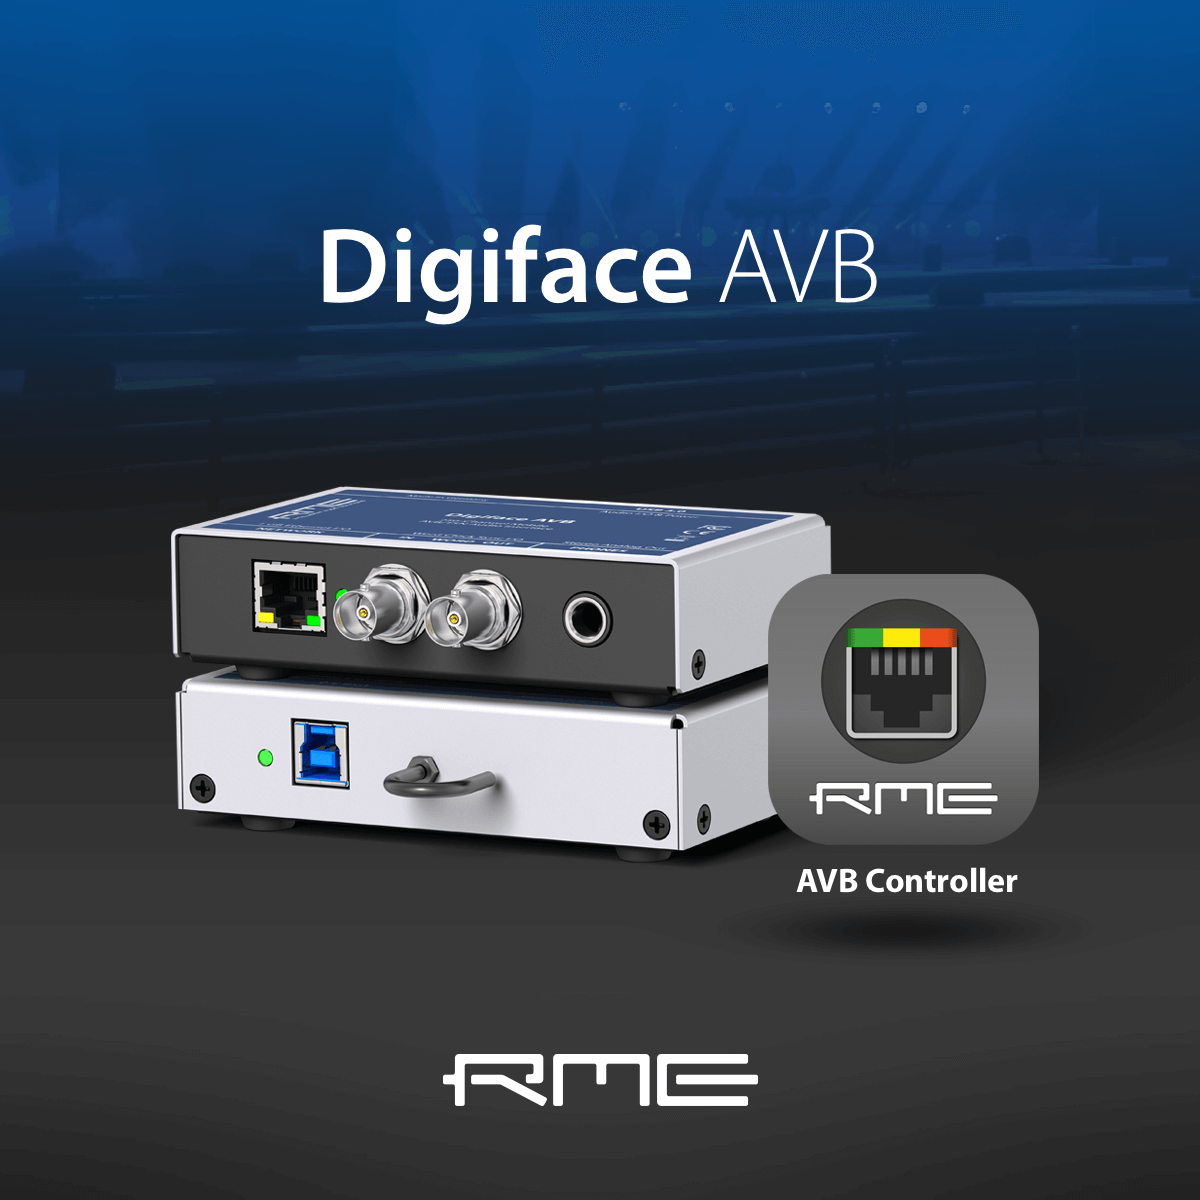 Download the latest Driver, Firmware & RME AVB Controller